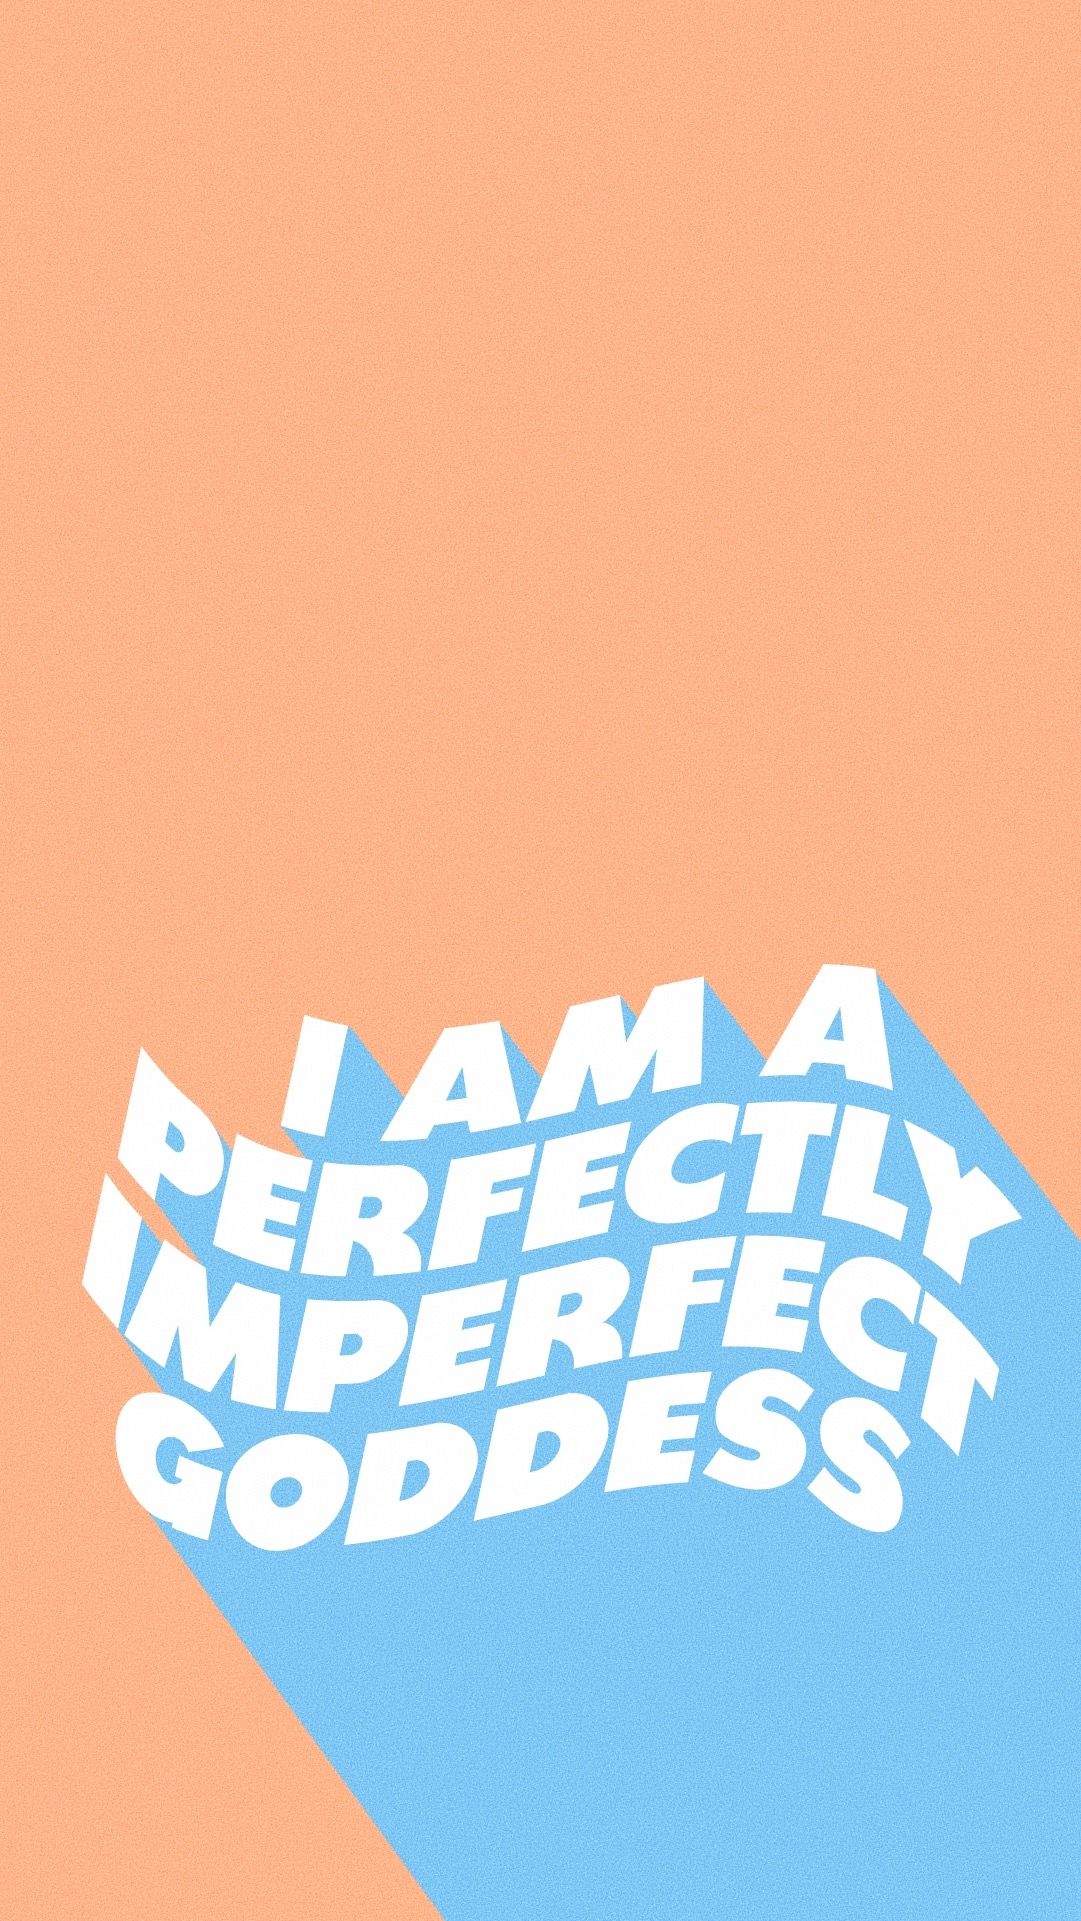 Perfectly Imperfect iPhone Wallpaper Download